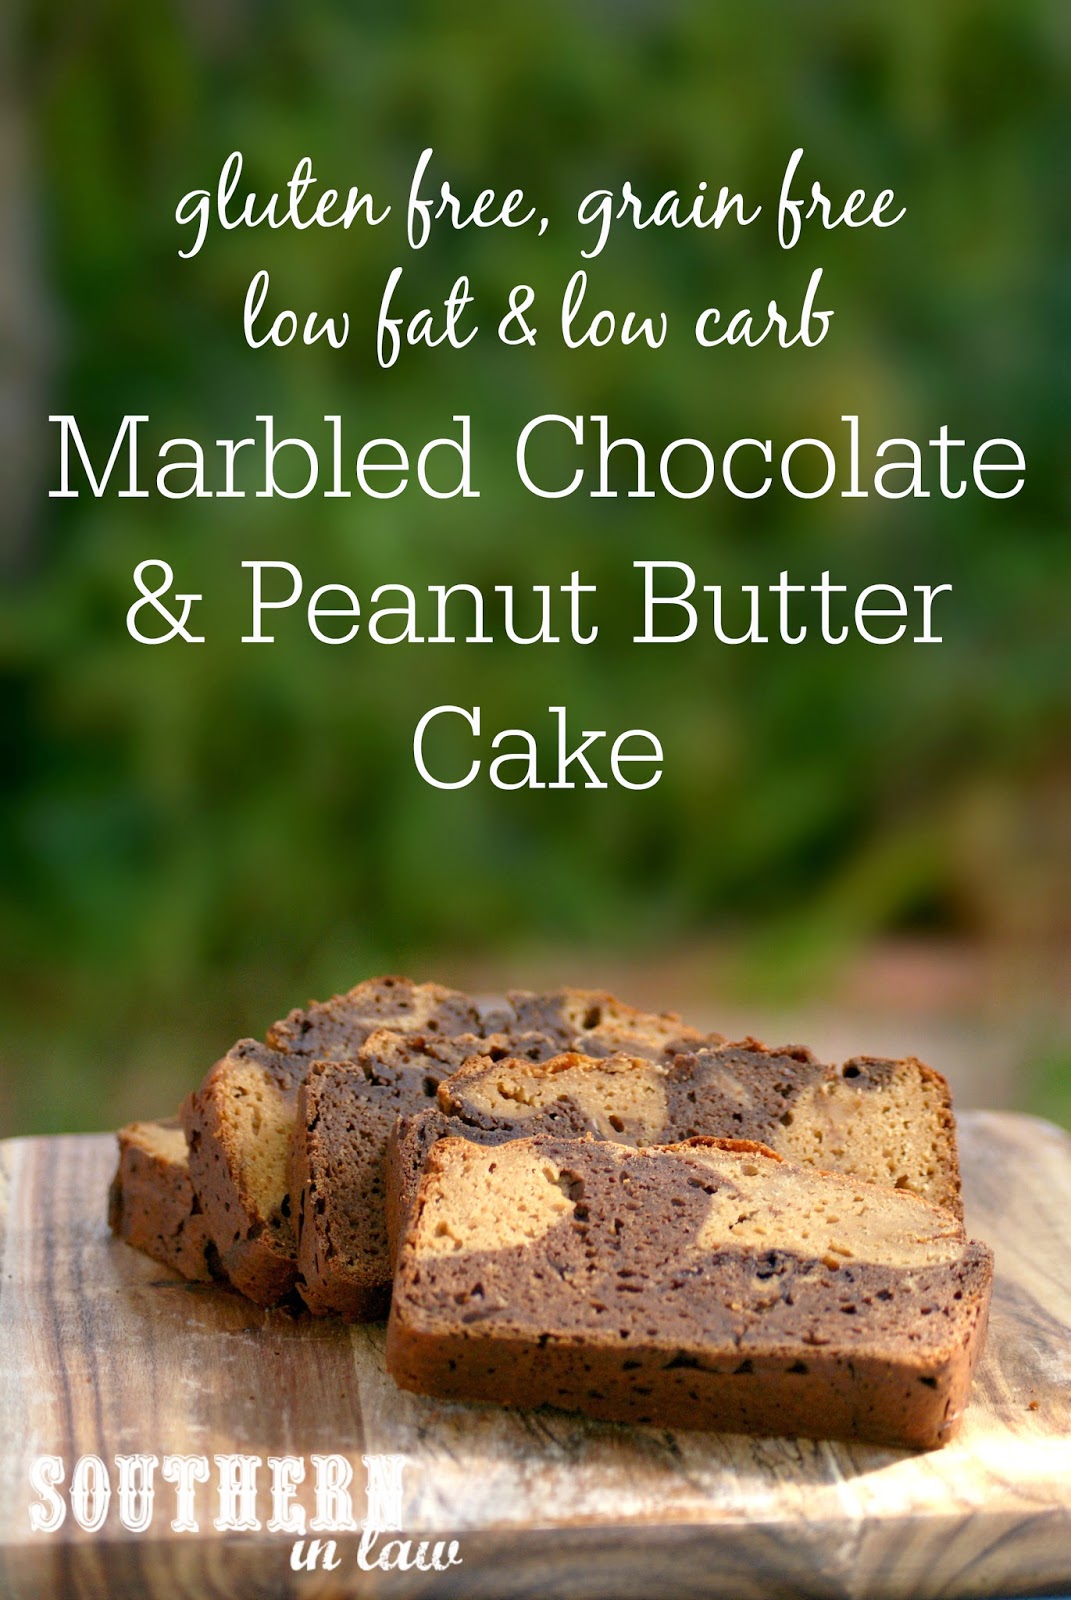 High Protein and Low Carb Marbled Chocolate And Peanut Butter Cake Recipe